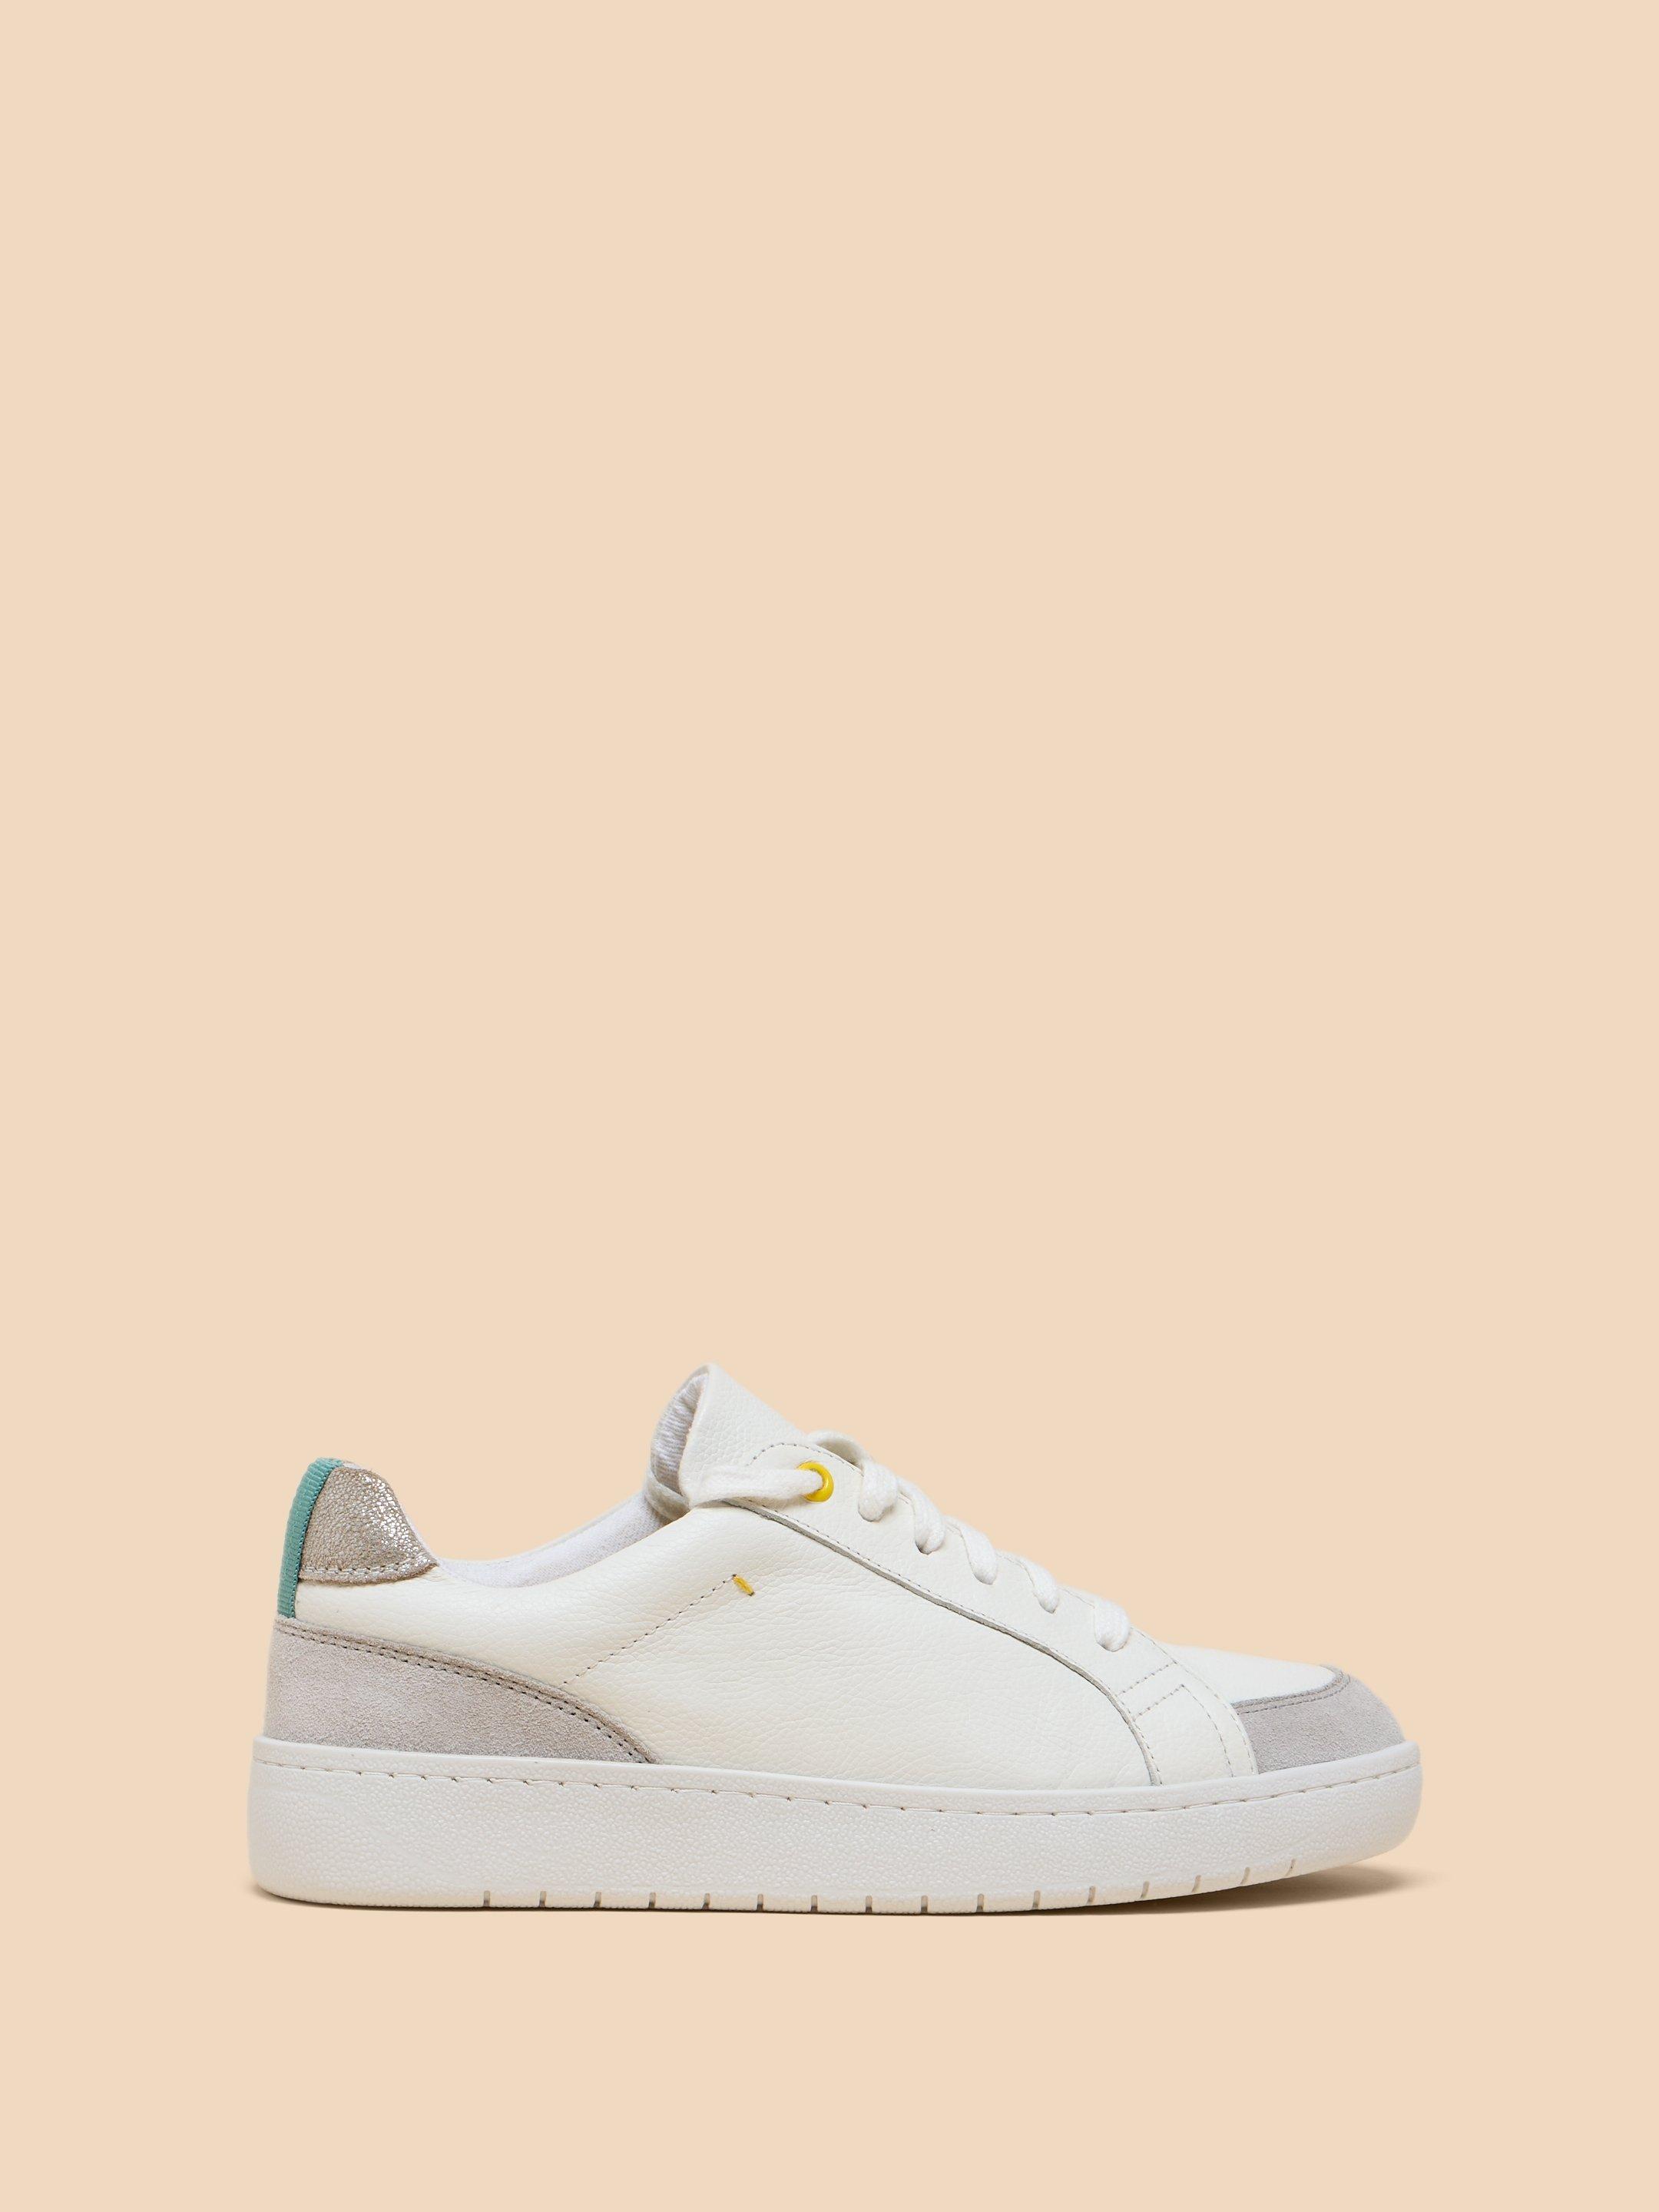 Lily Leather Suede Trainer in WHITE MLT - LIFESTYLE